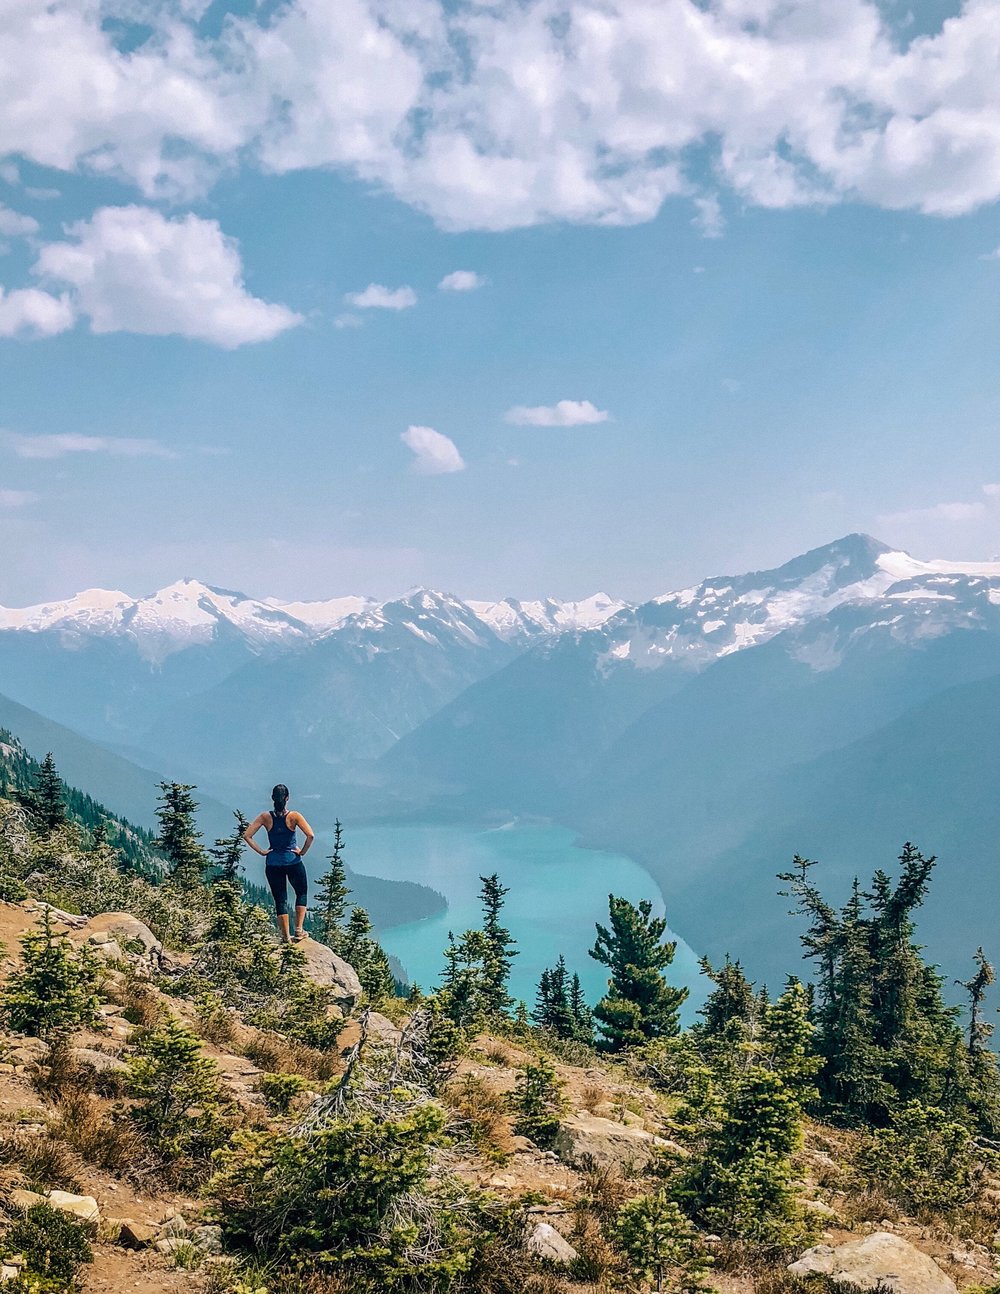 Most scenic mountain and lake views on Whistler Blackcomb Canada